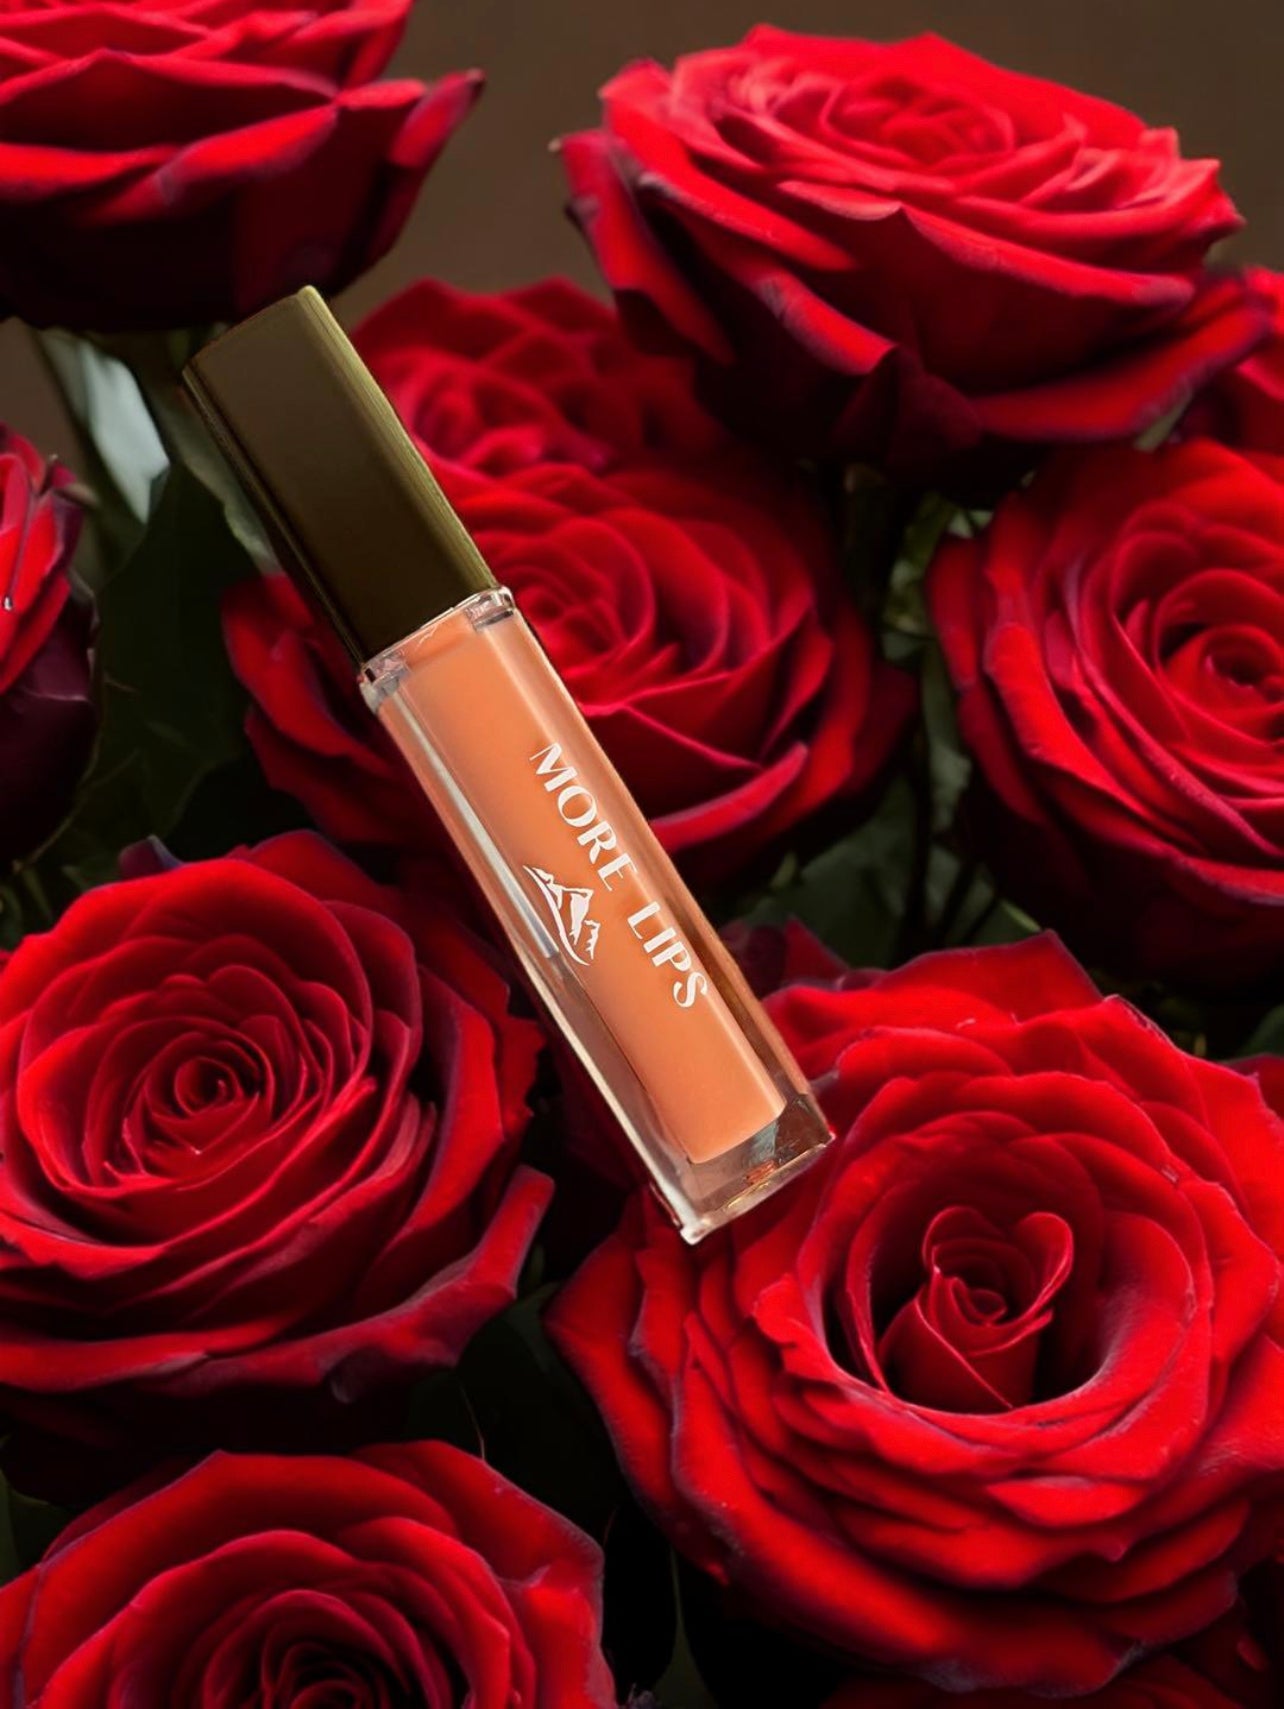 High-Shine Vegan Lip Gloss in Sparkling Coral, a coral shade with added sparkle for a dazzling lip look